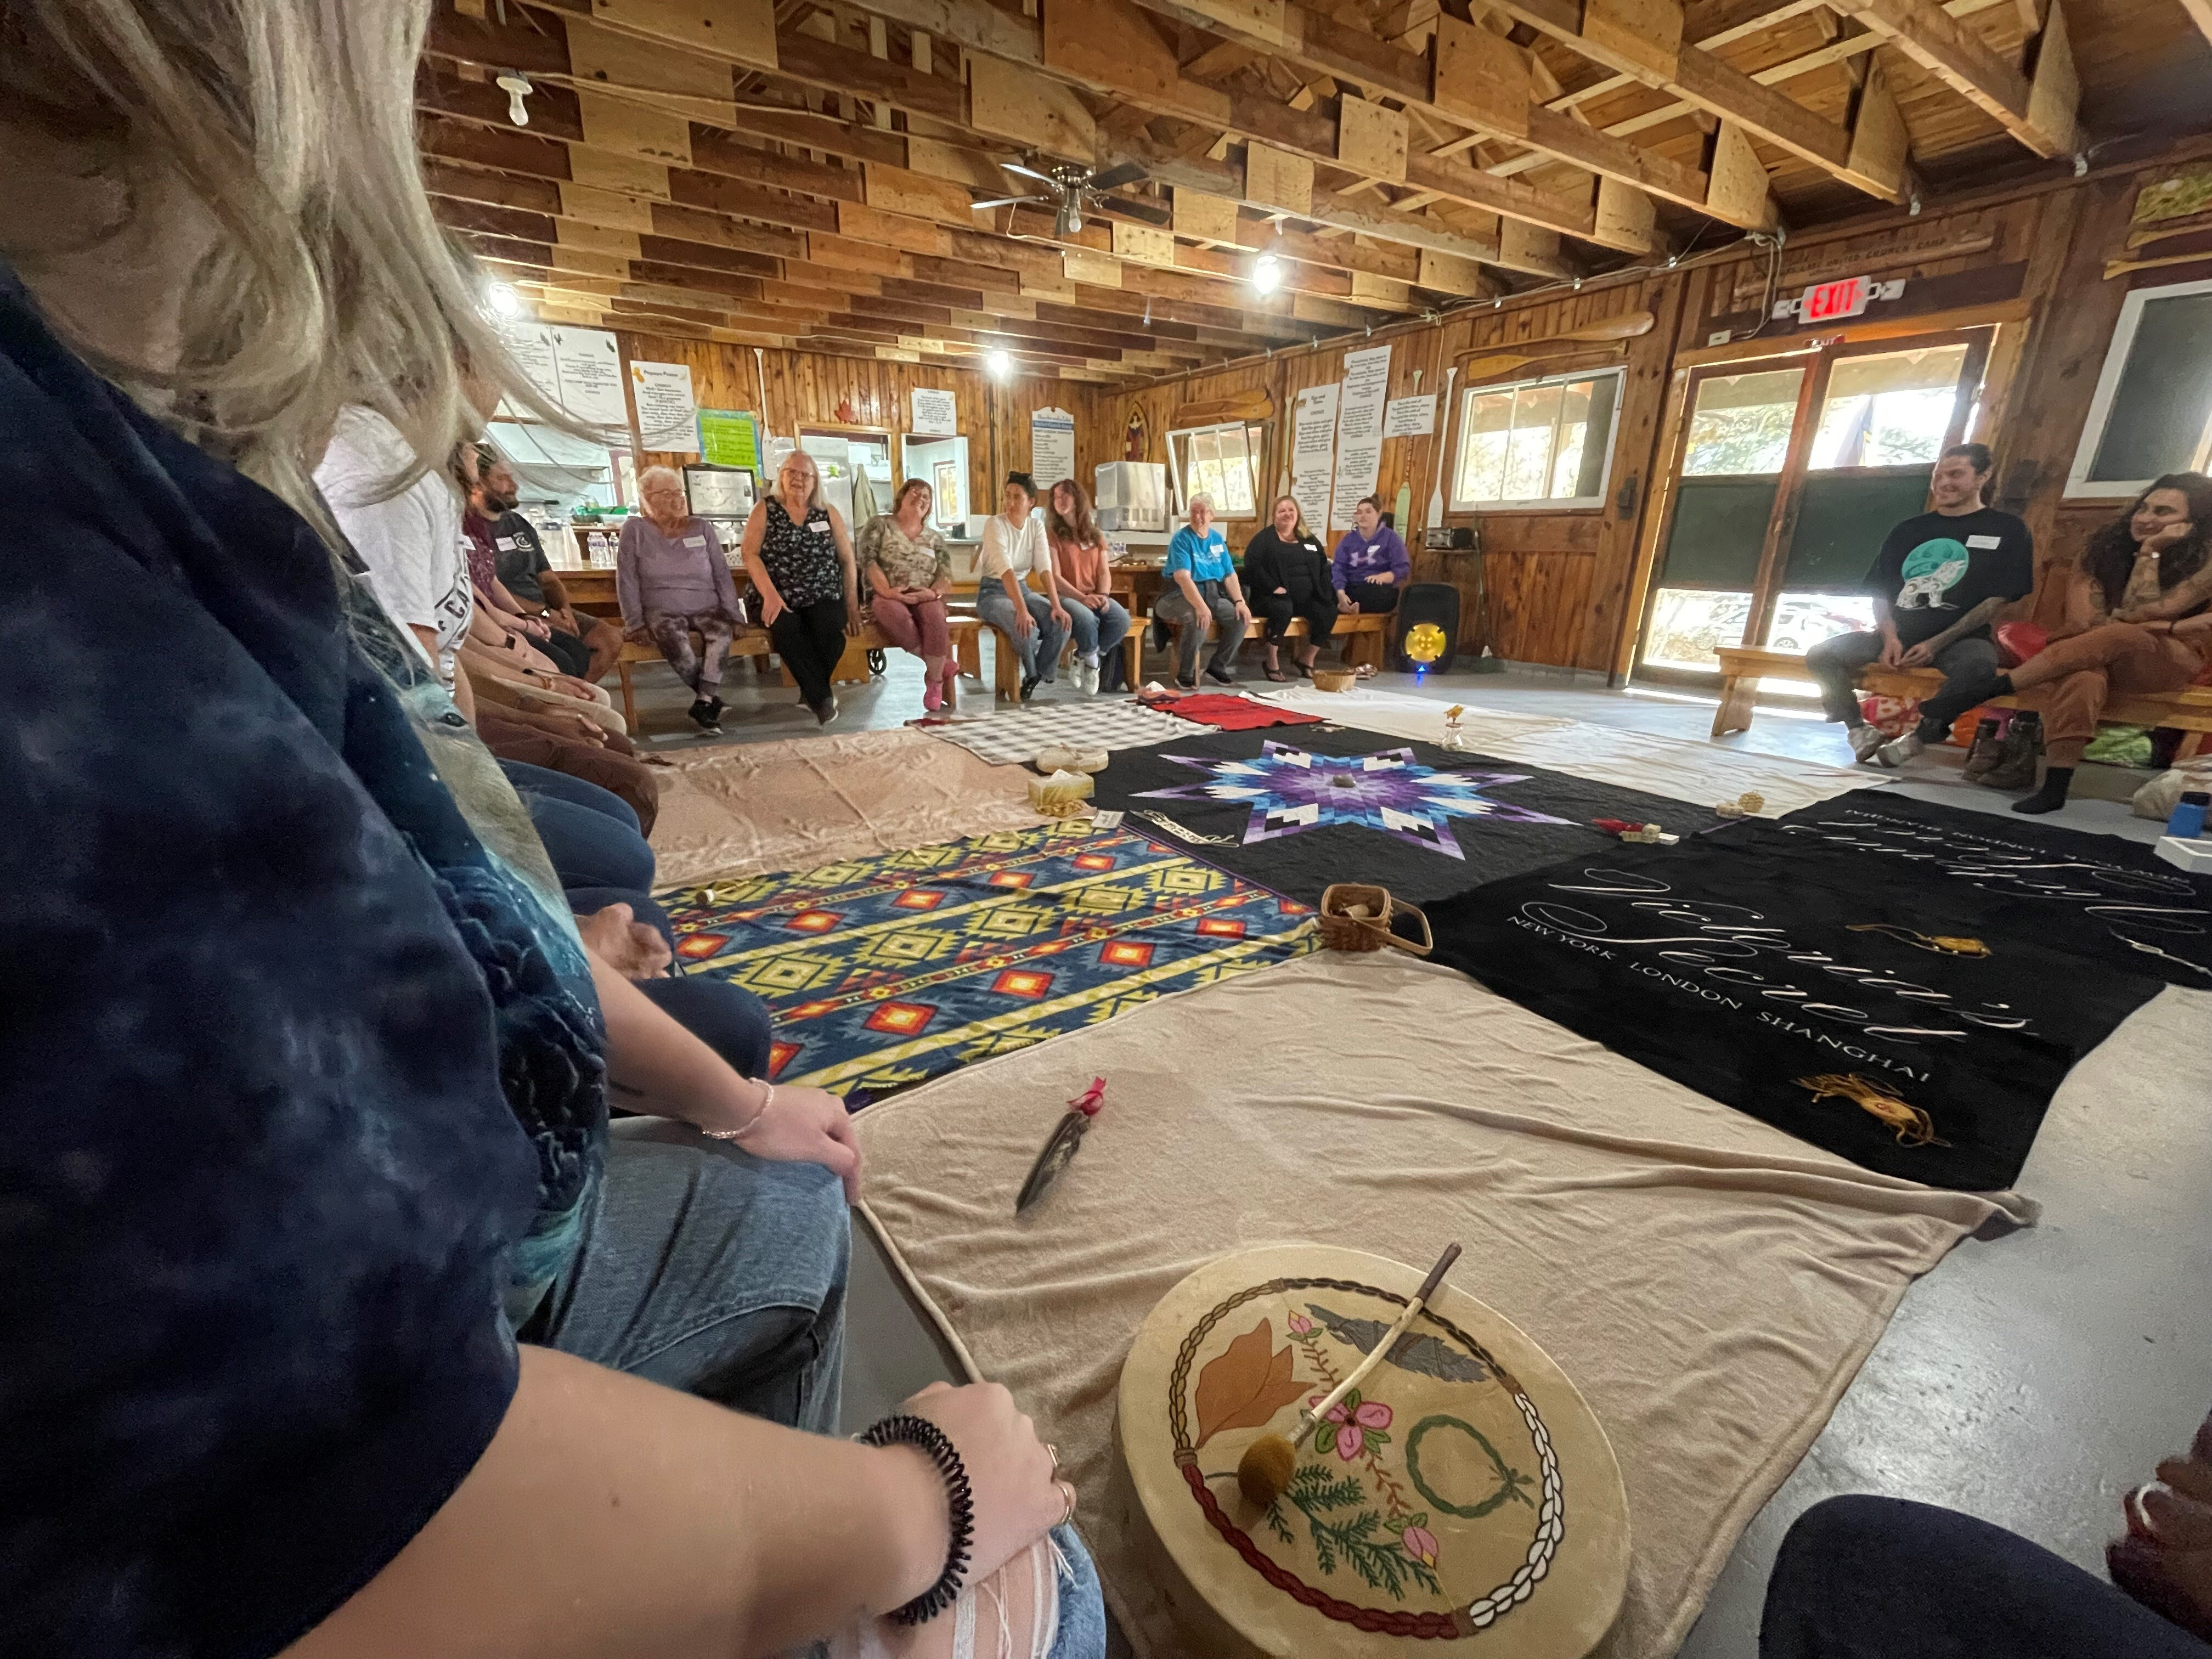  Justice & Reconciliation event at Sherbrooke Lake Camp